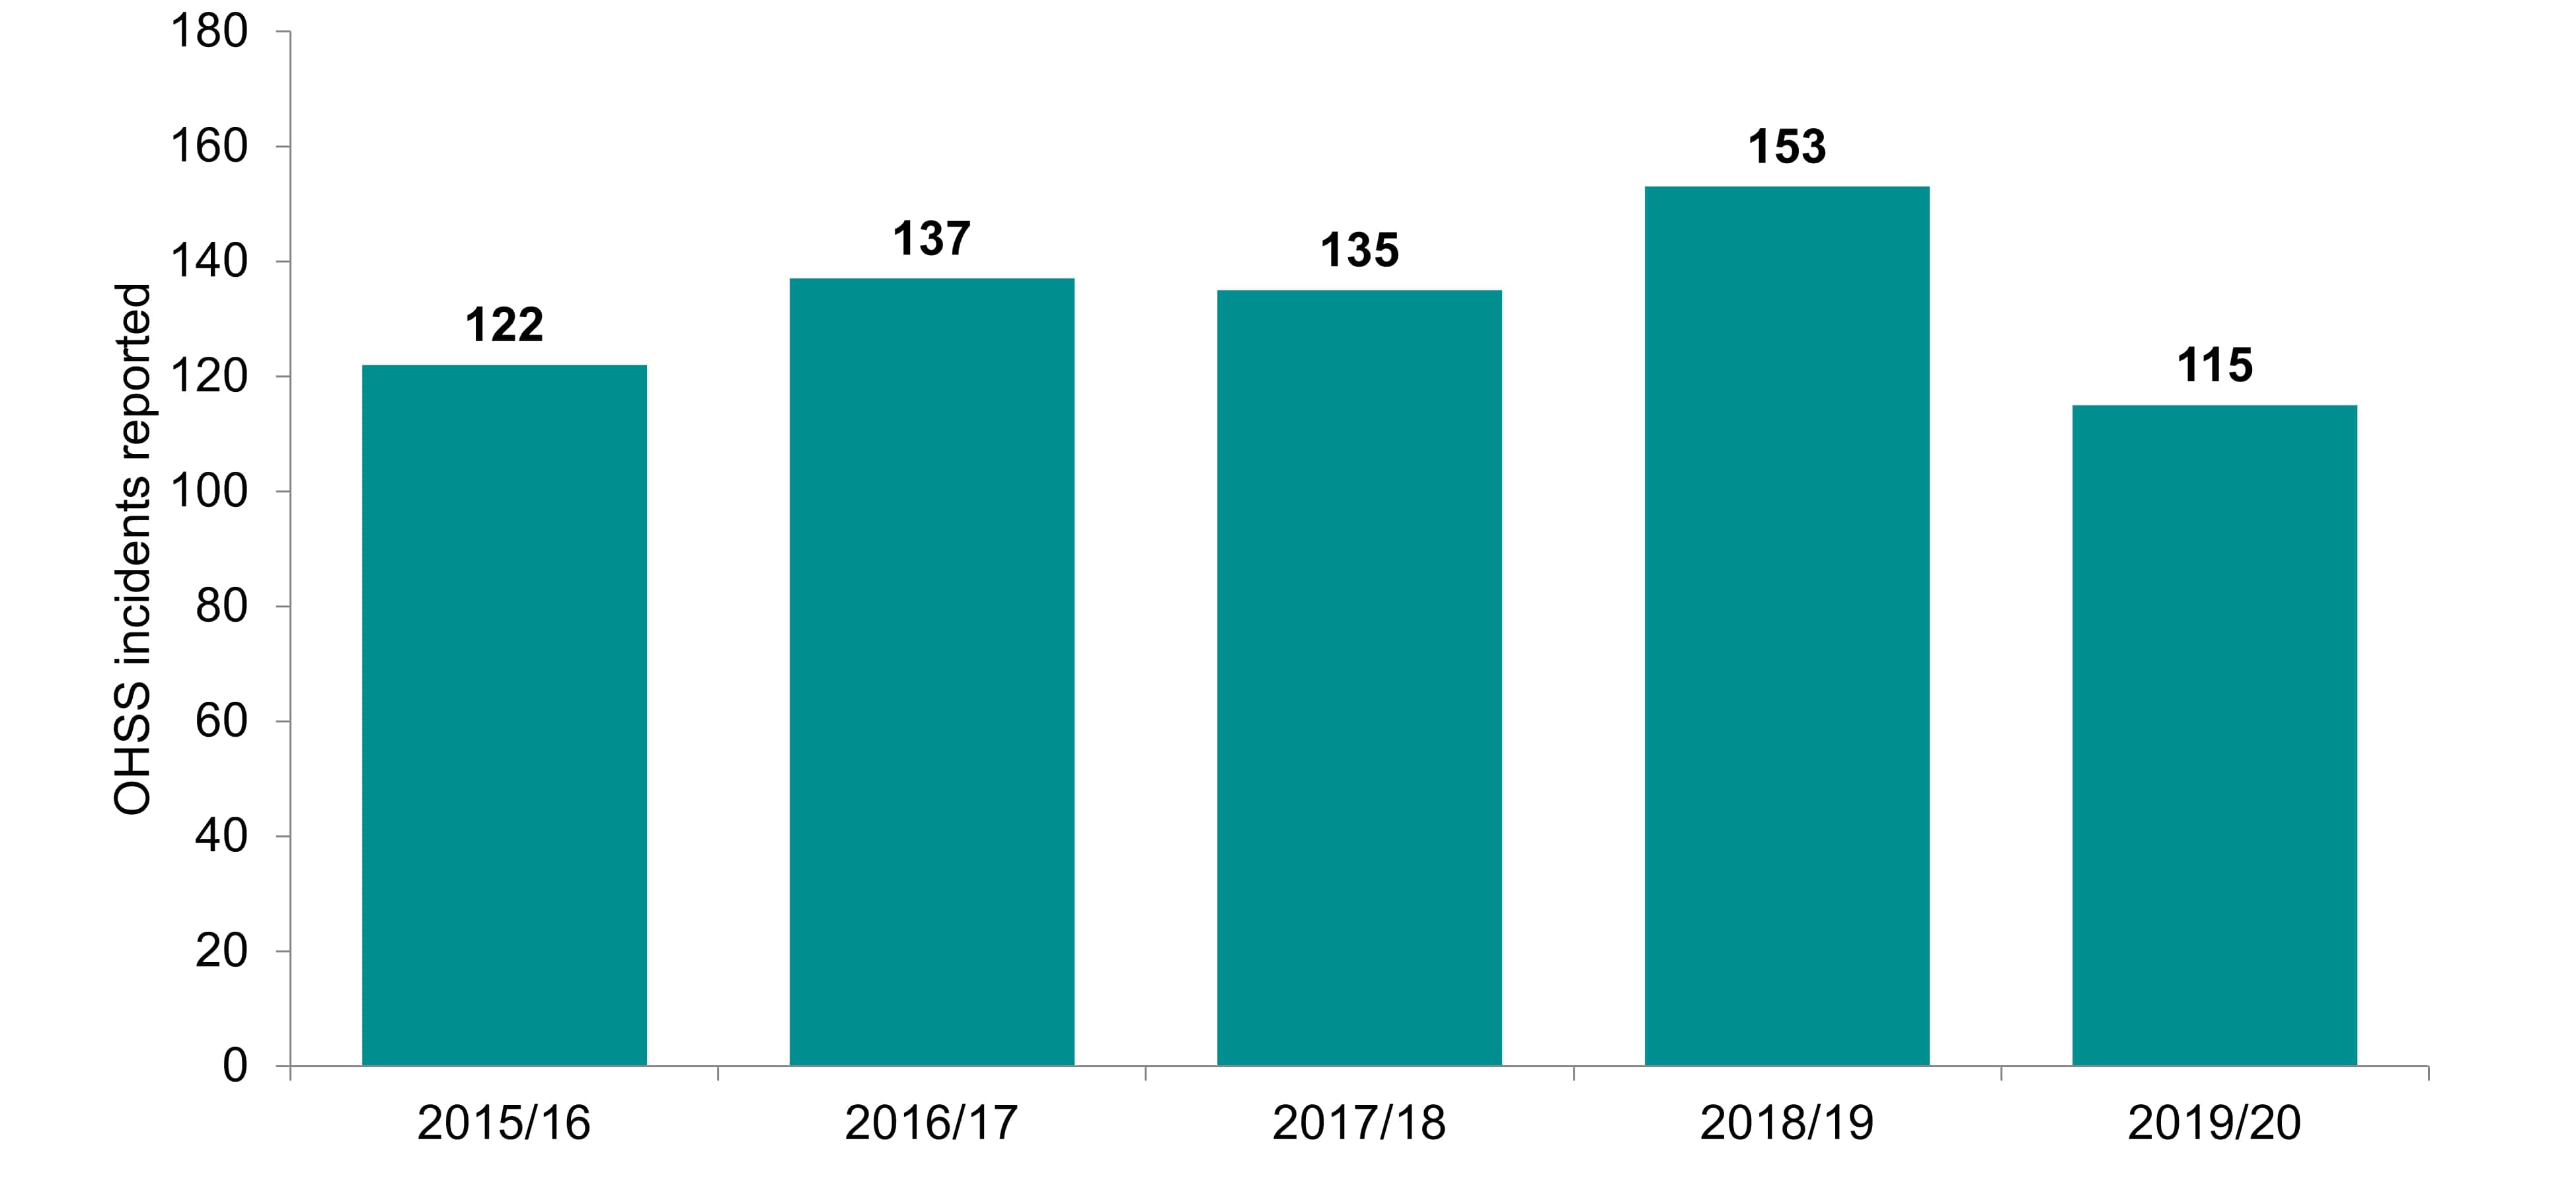 [1. Label] Number of mild, moderate and severe OHSS incidents reported 2016/17 -2019/20. [2. Construction] This bar chart shows the number of mild, moderate and severe OHSS incidents reported from 2015/16 to 2019/20. [3. Summary] The number of mild, moderate and severe OHSS incidents reported has decreased by 25% on the previous year to 115 in 2019/20 [4. Data] The figures are 2015/16 122; 2016/17 137; 2017/18 135; 2018/19 153; and 2019/20 115.